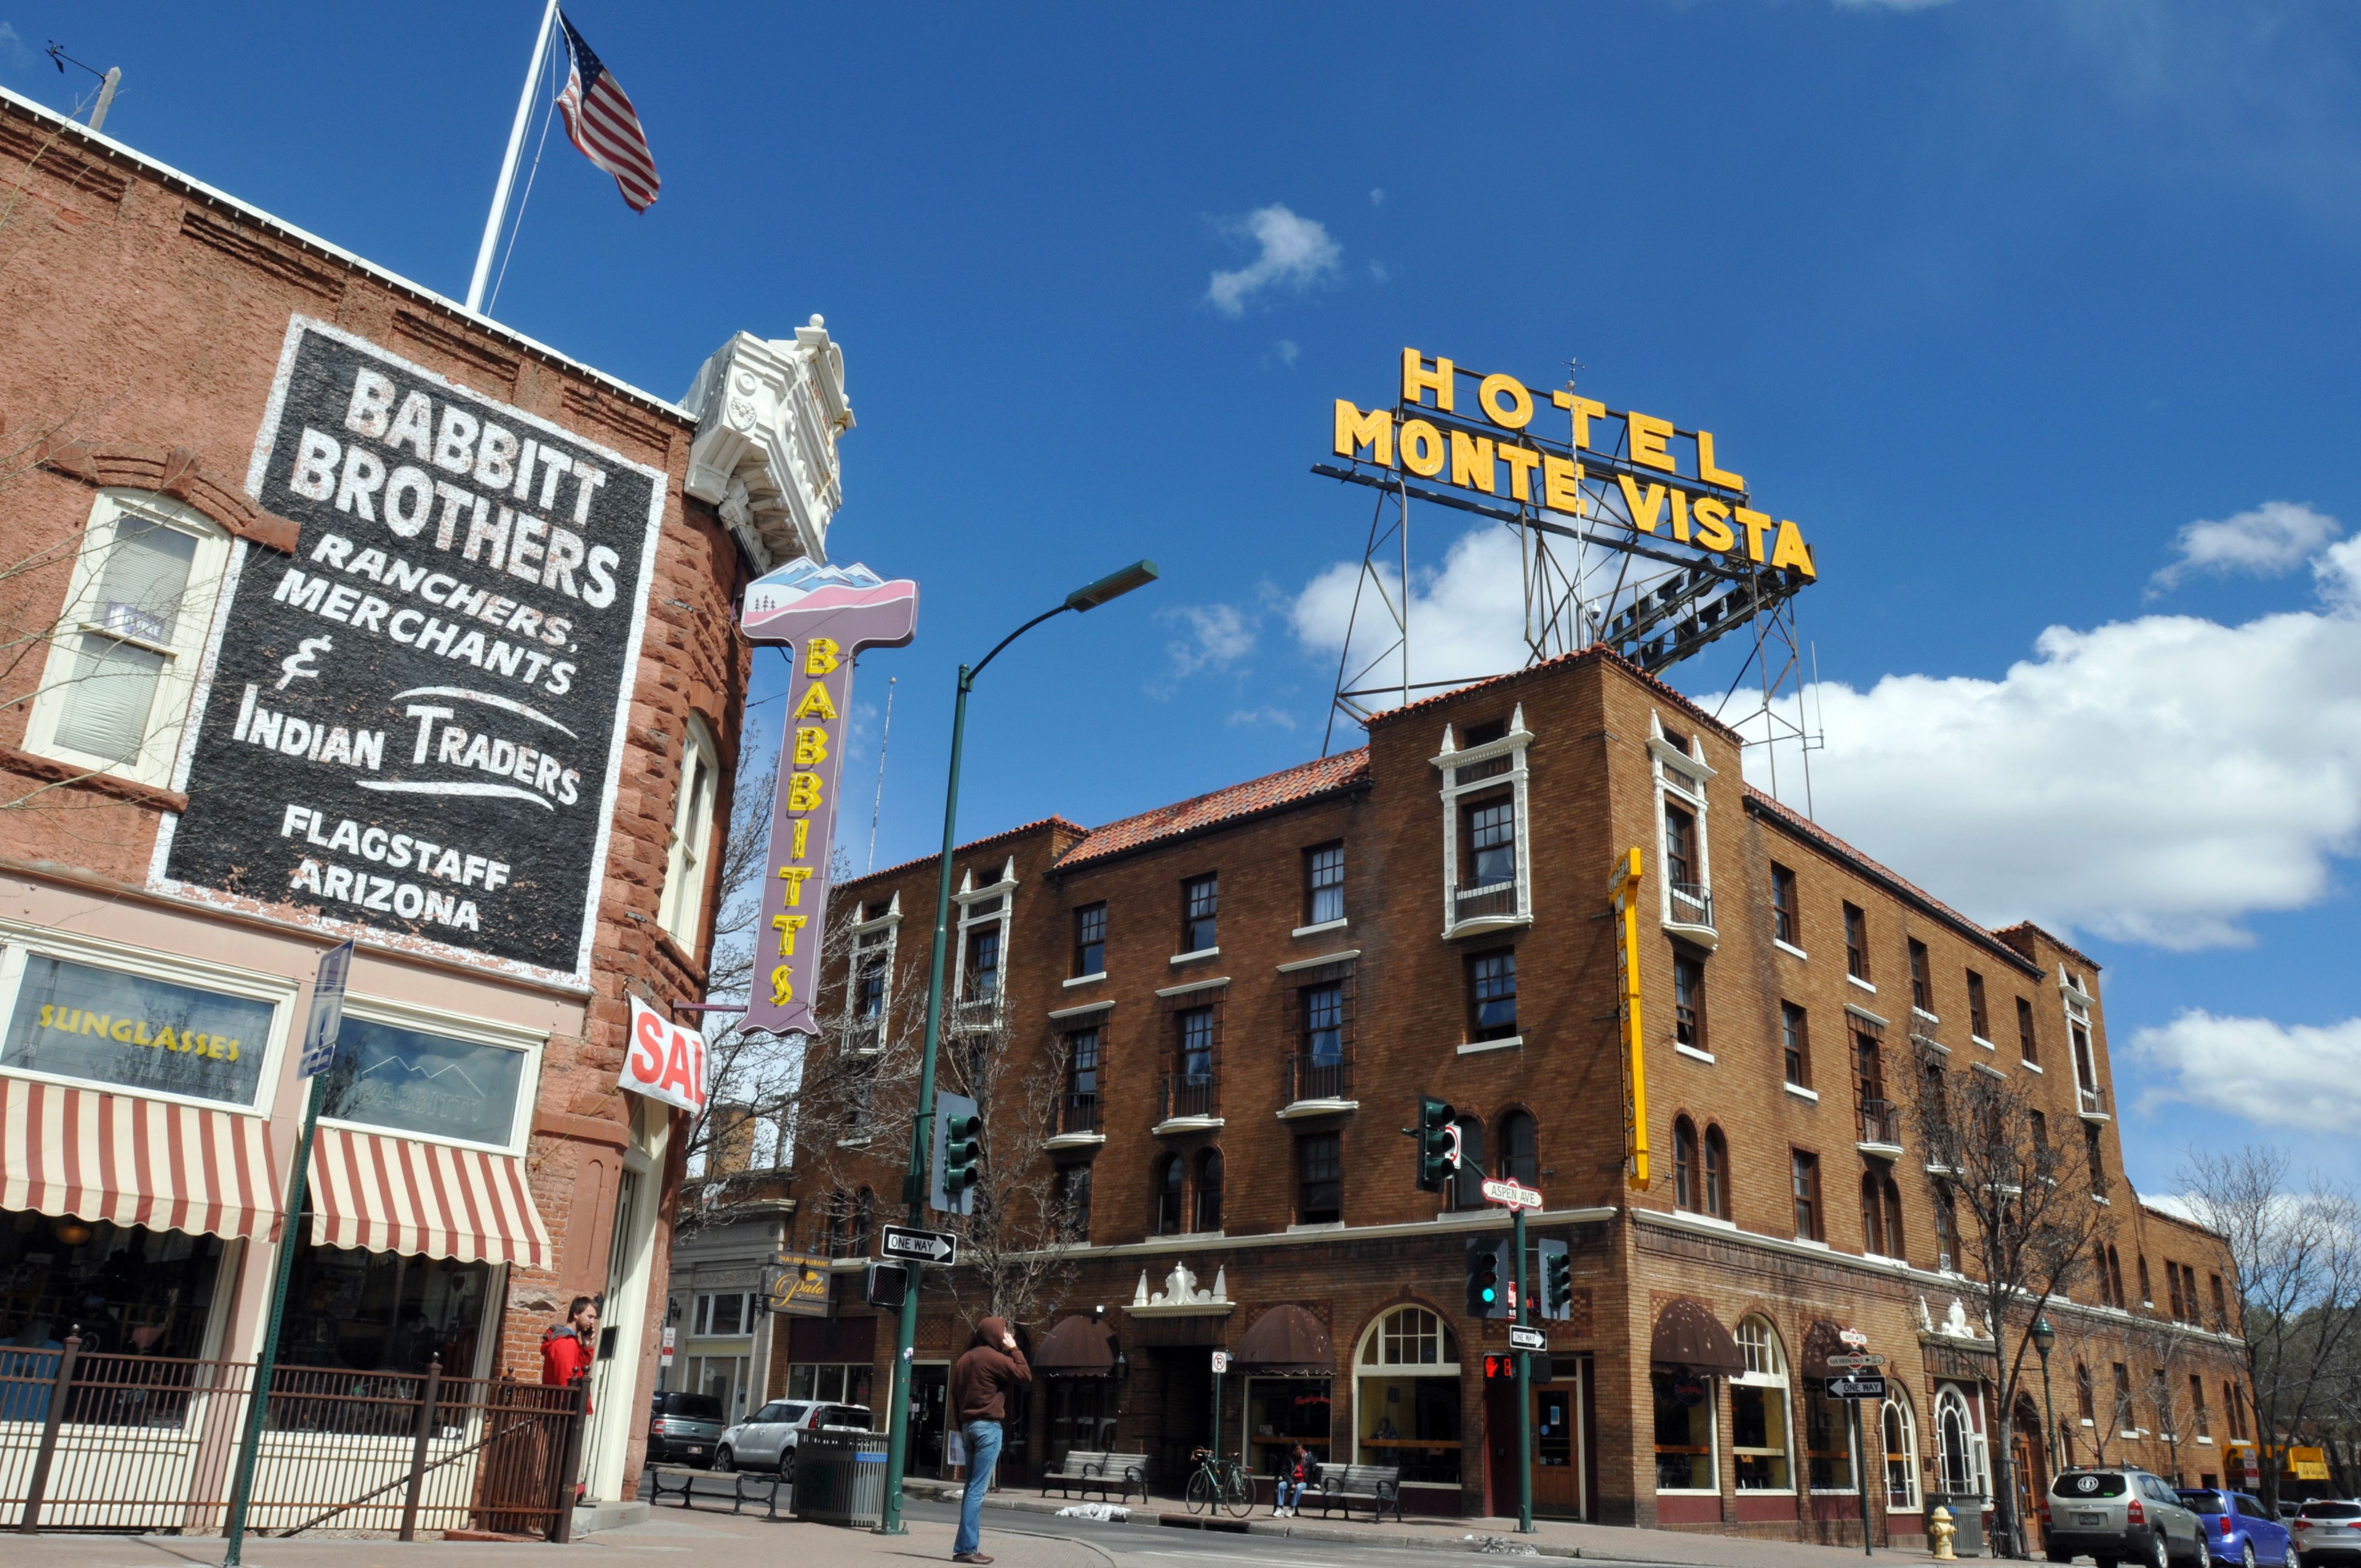 The 1927 Hotel Monte Vista and the 1888 Babbitt Brothers store are landmarks in Flagstaff, Arizona's historic downtown district.